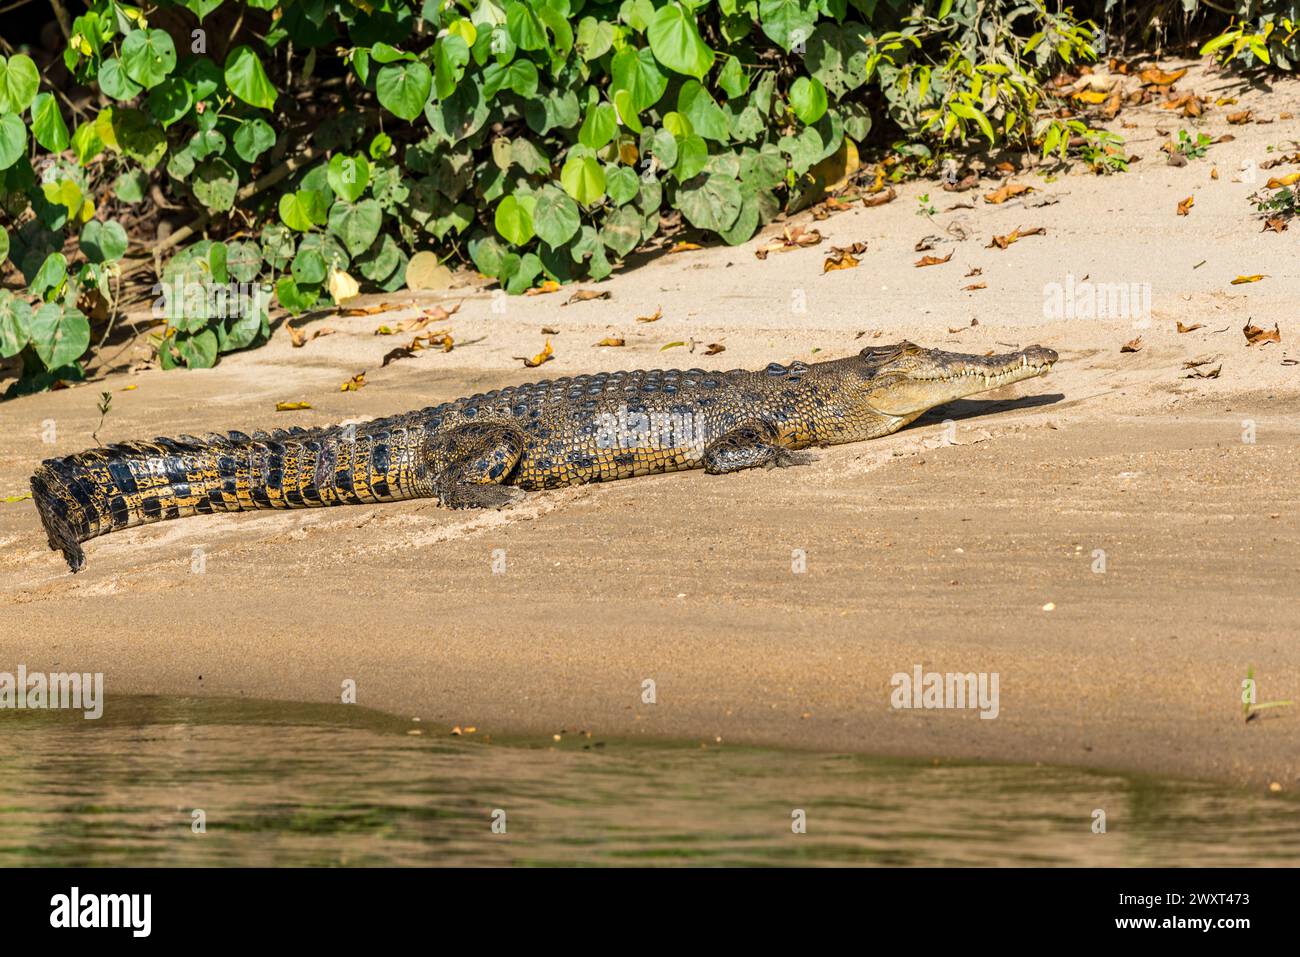 A relatively young estuarine saltwater Australian Crocodile locally named Scarlett warms itself on the banks of the Daintree River, Queensland Stock Photo